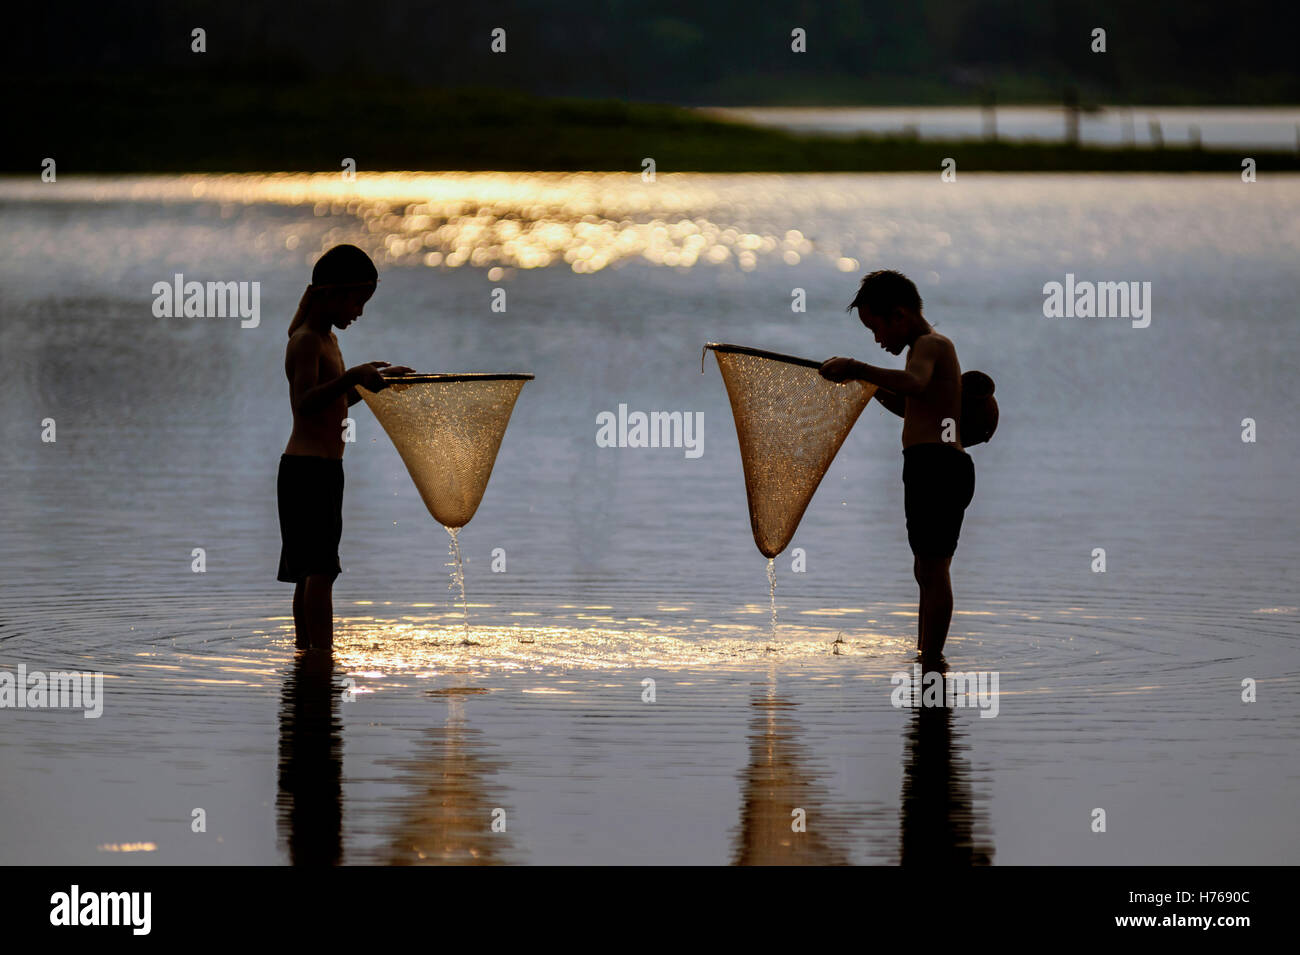 Silhouette of two boys fishing at sunset Stock Photo